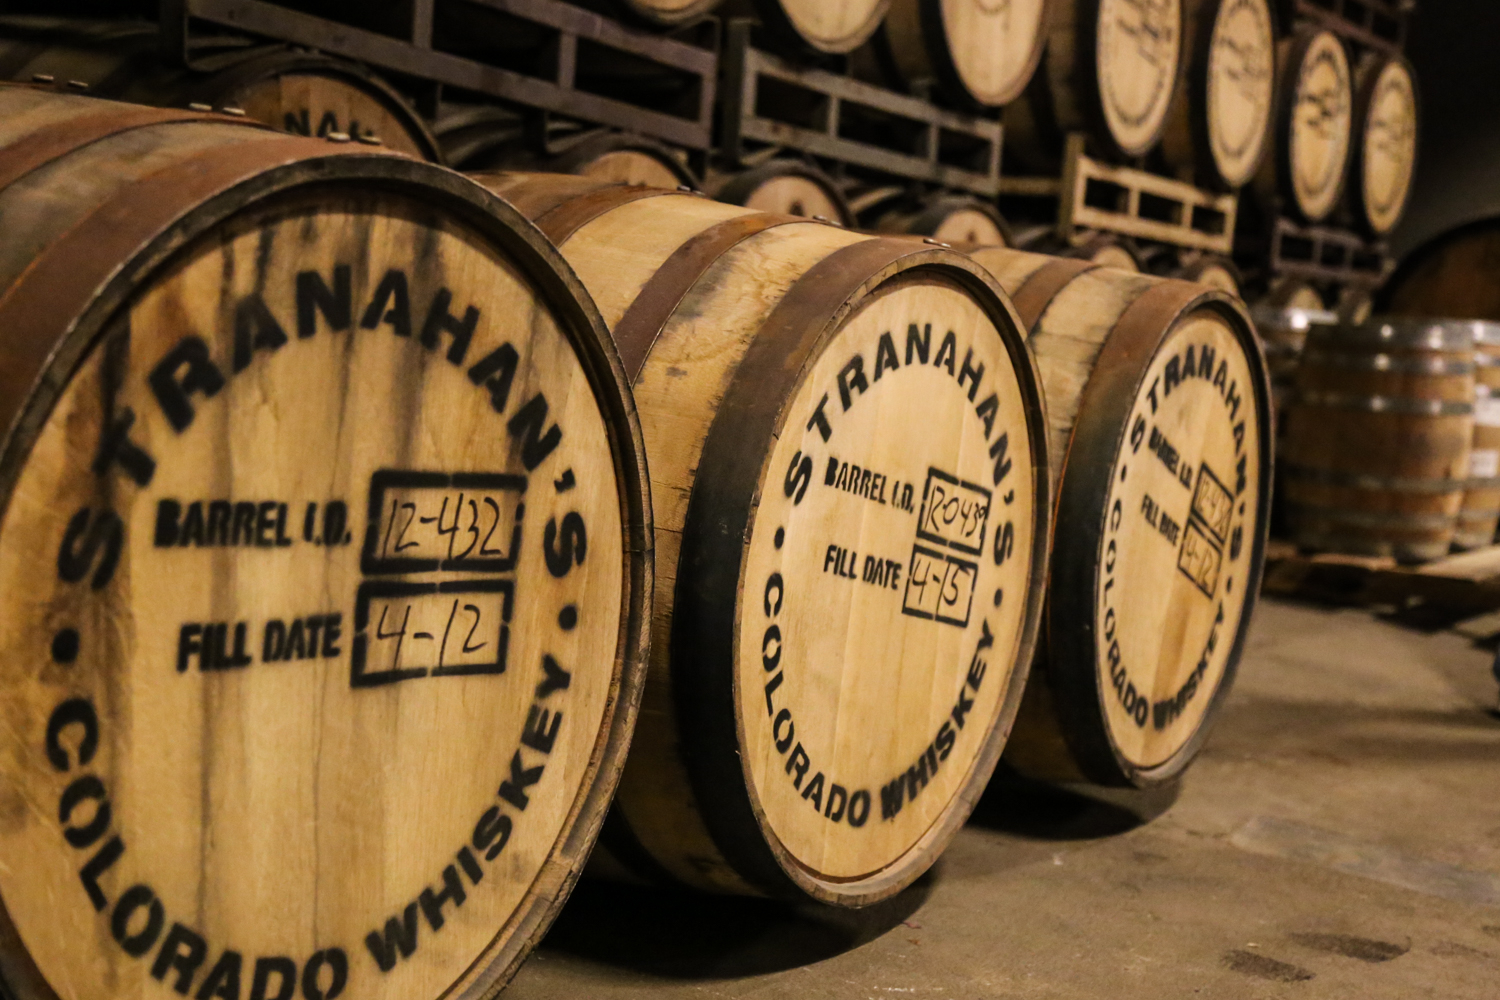 Stranahan's whiskey barrels. All photography by Brent Andeck.